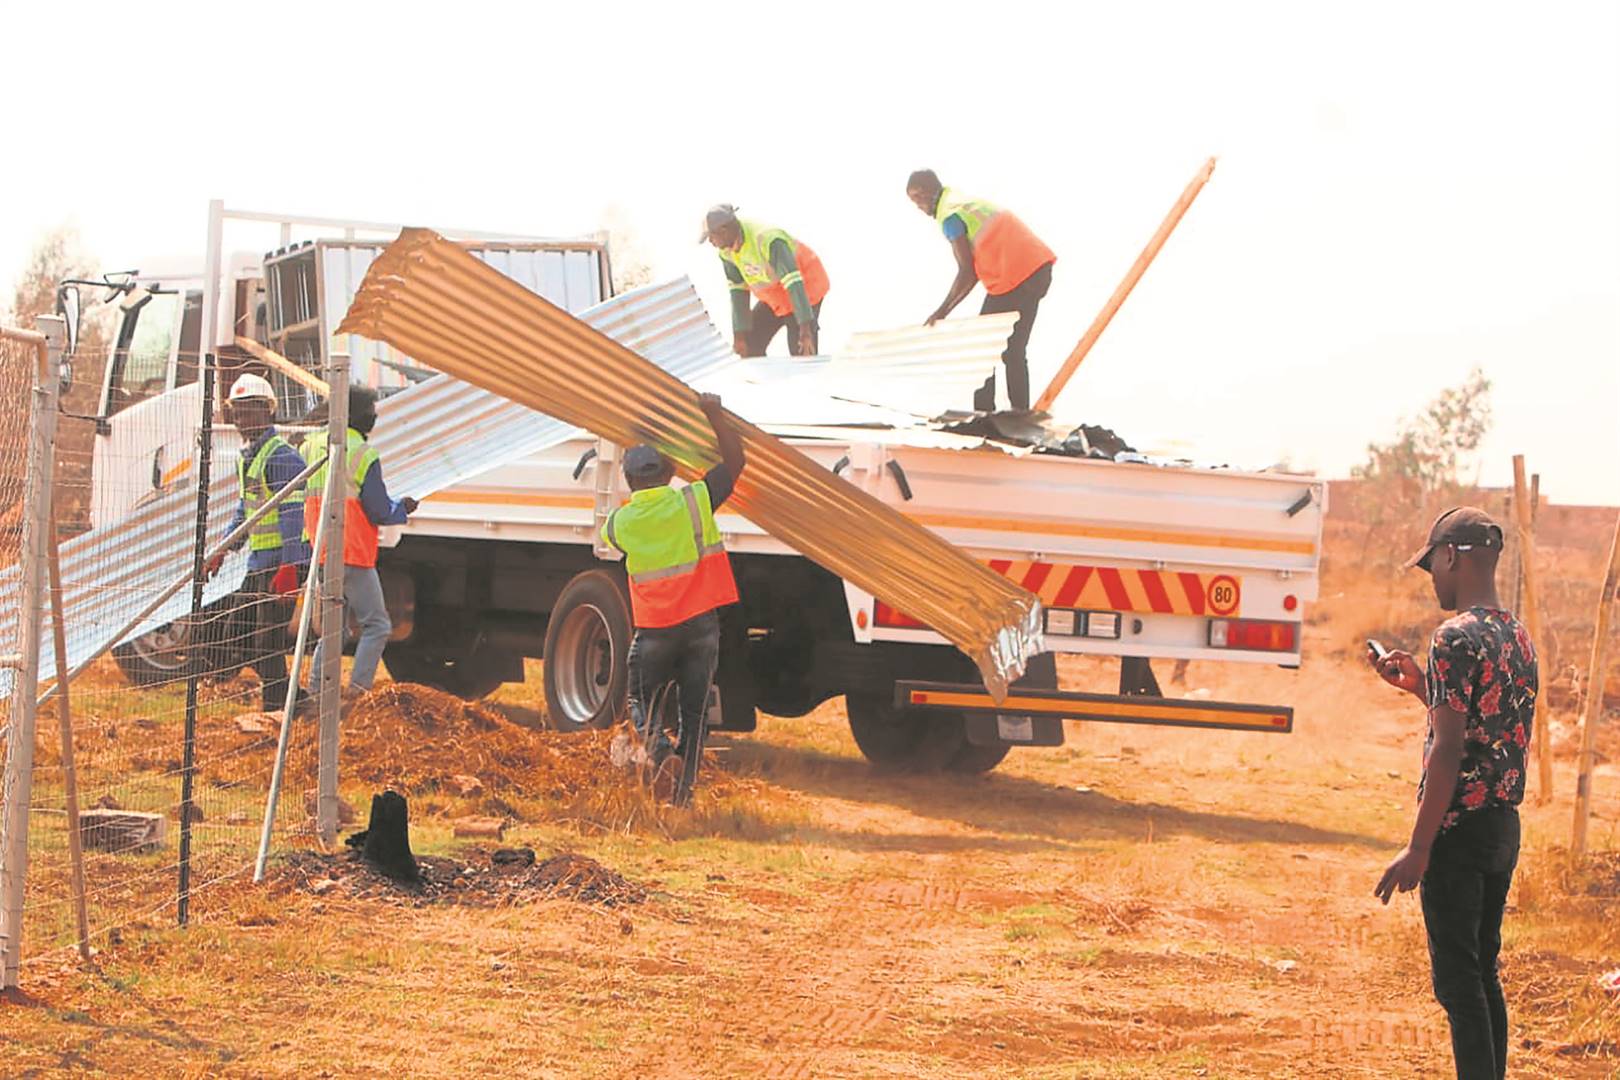 Members of the Land Invasion Unit demolishing shacks built illegally on land meant for RDP houses in Lehae.         Photo by Raymond Morare